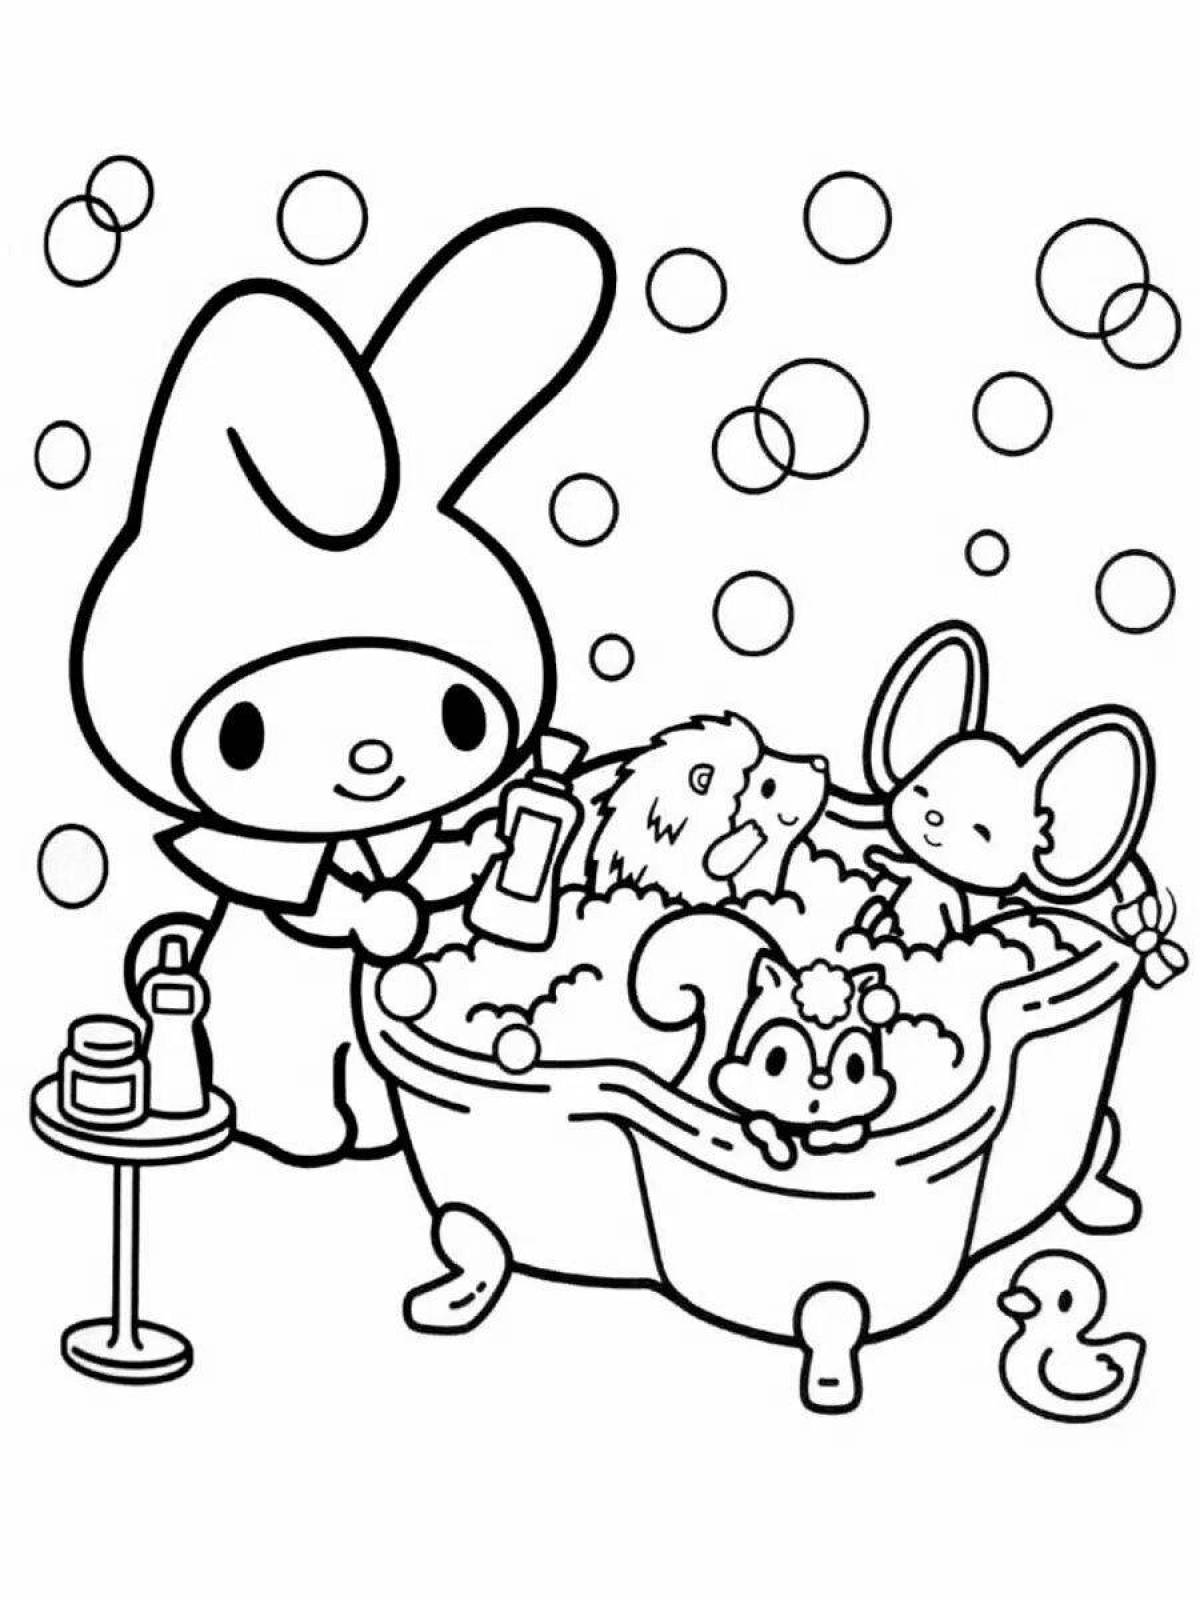 Giggly coloring page melody kitty